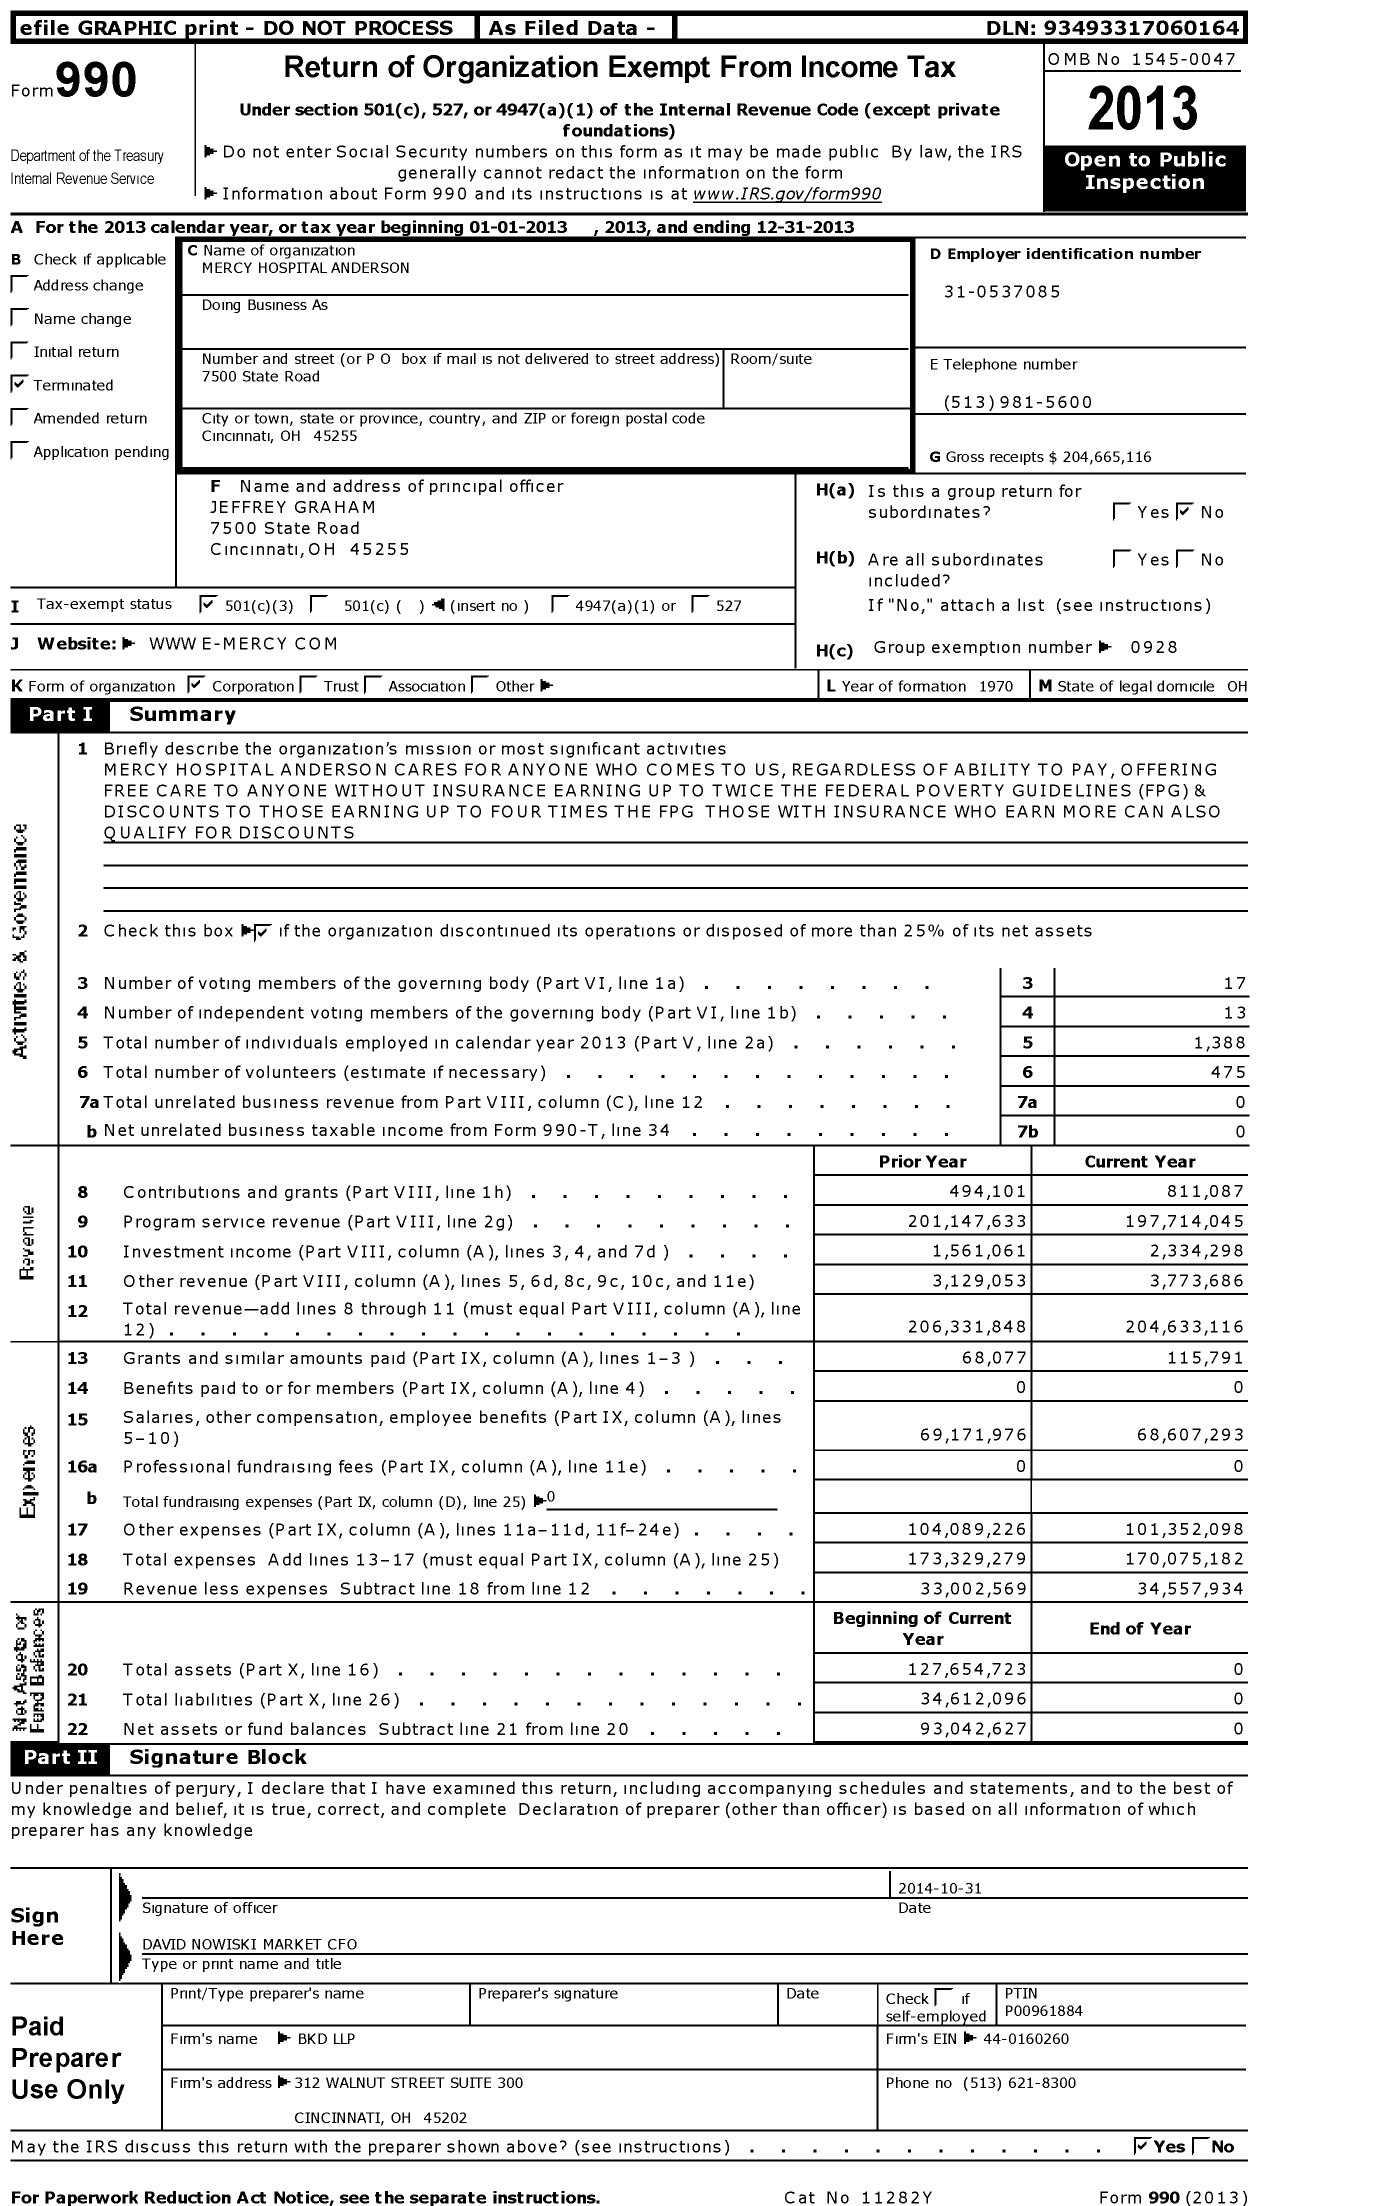 Image of first page of 2013 Form 990 for Mercy Hospital Anderson